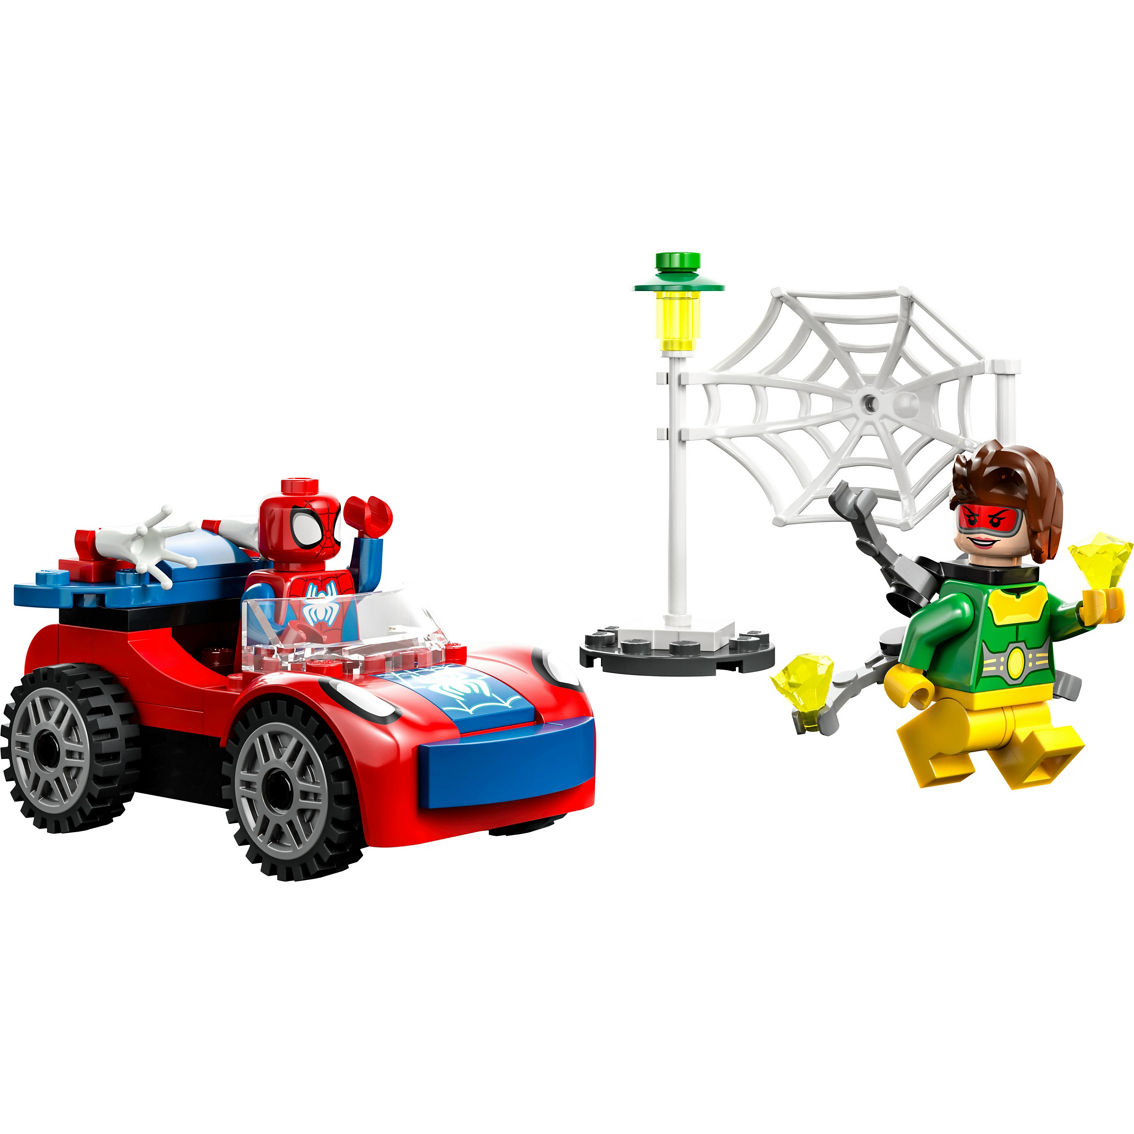 Lego Spidey Spider-Man's Car and Doc Ock 10789 - Image 4 of 7